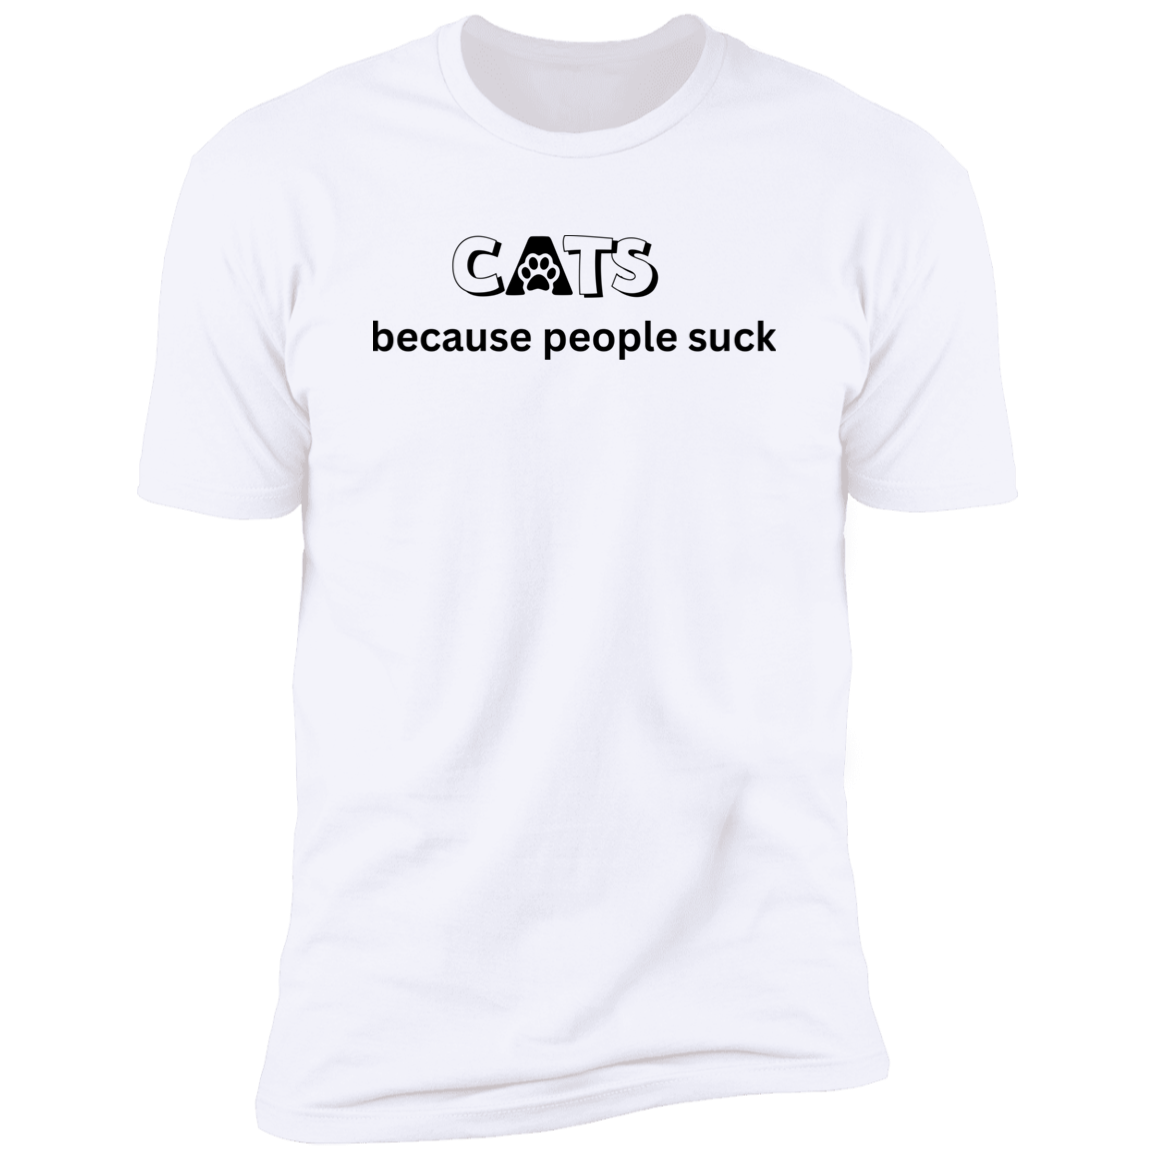 Cats Because People Suck T-shirt, Cat Shirt for humans, in white